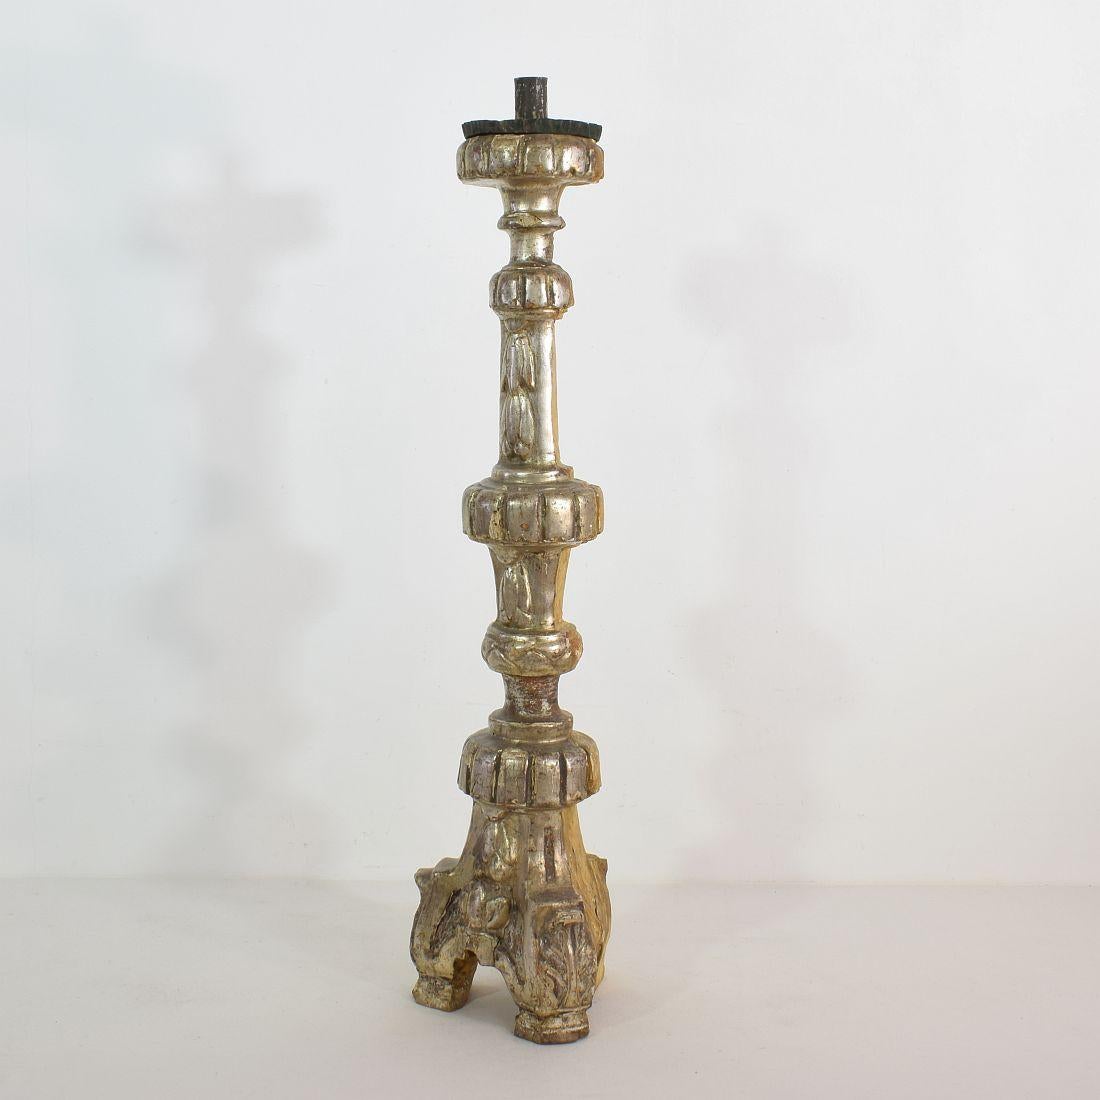 Beautiful candleholder with its original silver,
Italy, circa 1770-1800.
Weathered and small losses.